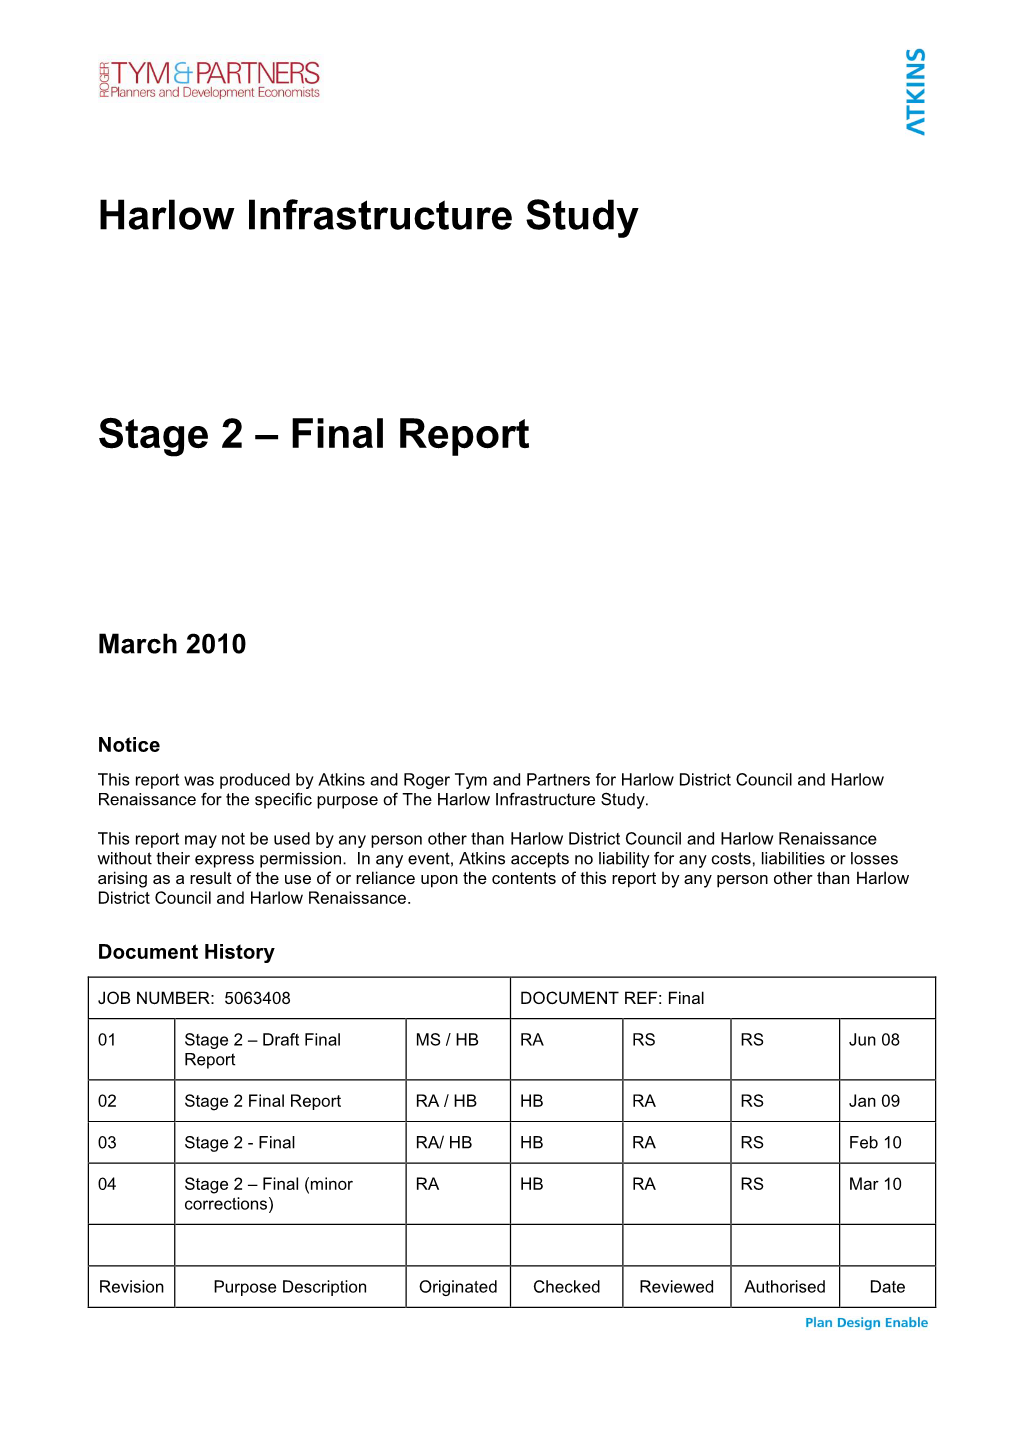 Harlow Infrastructure Study Stage 2